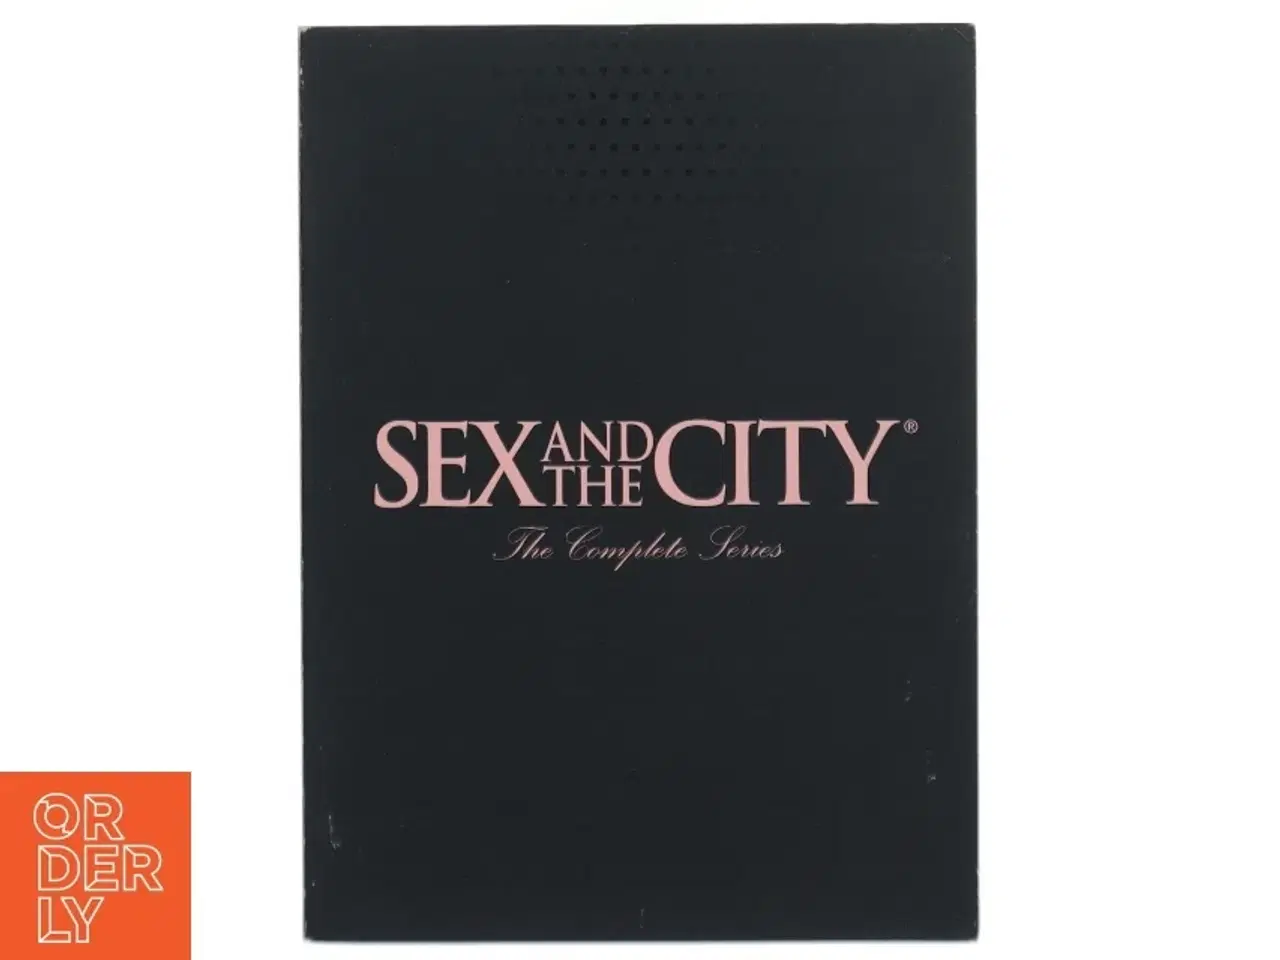 Billede 1 - Sex and the city